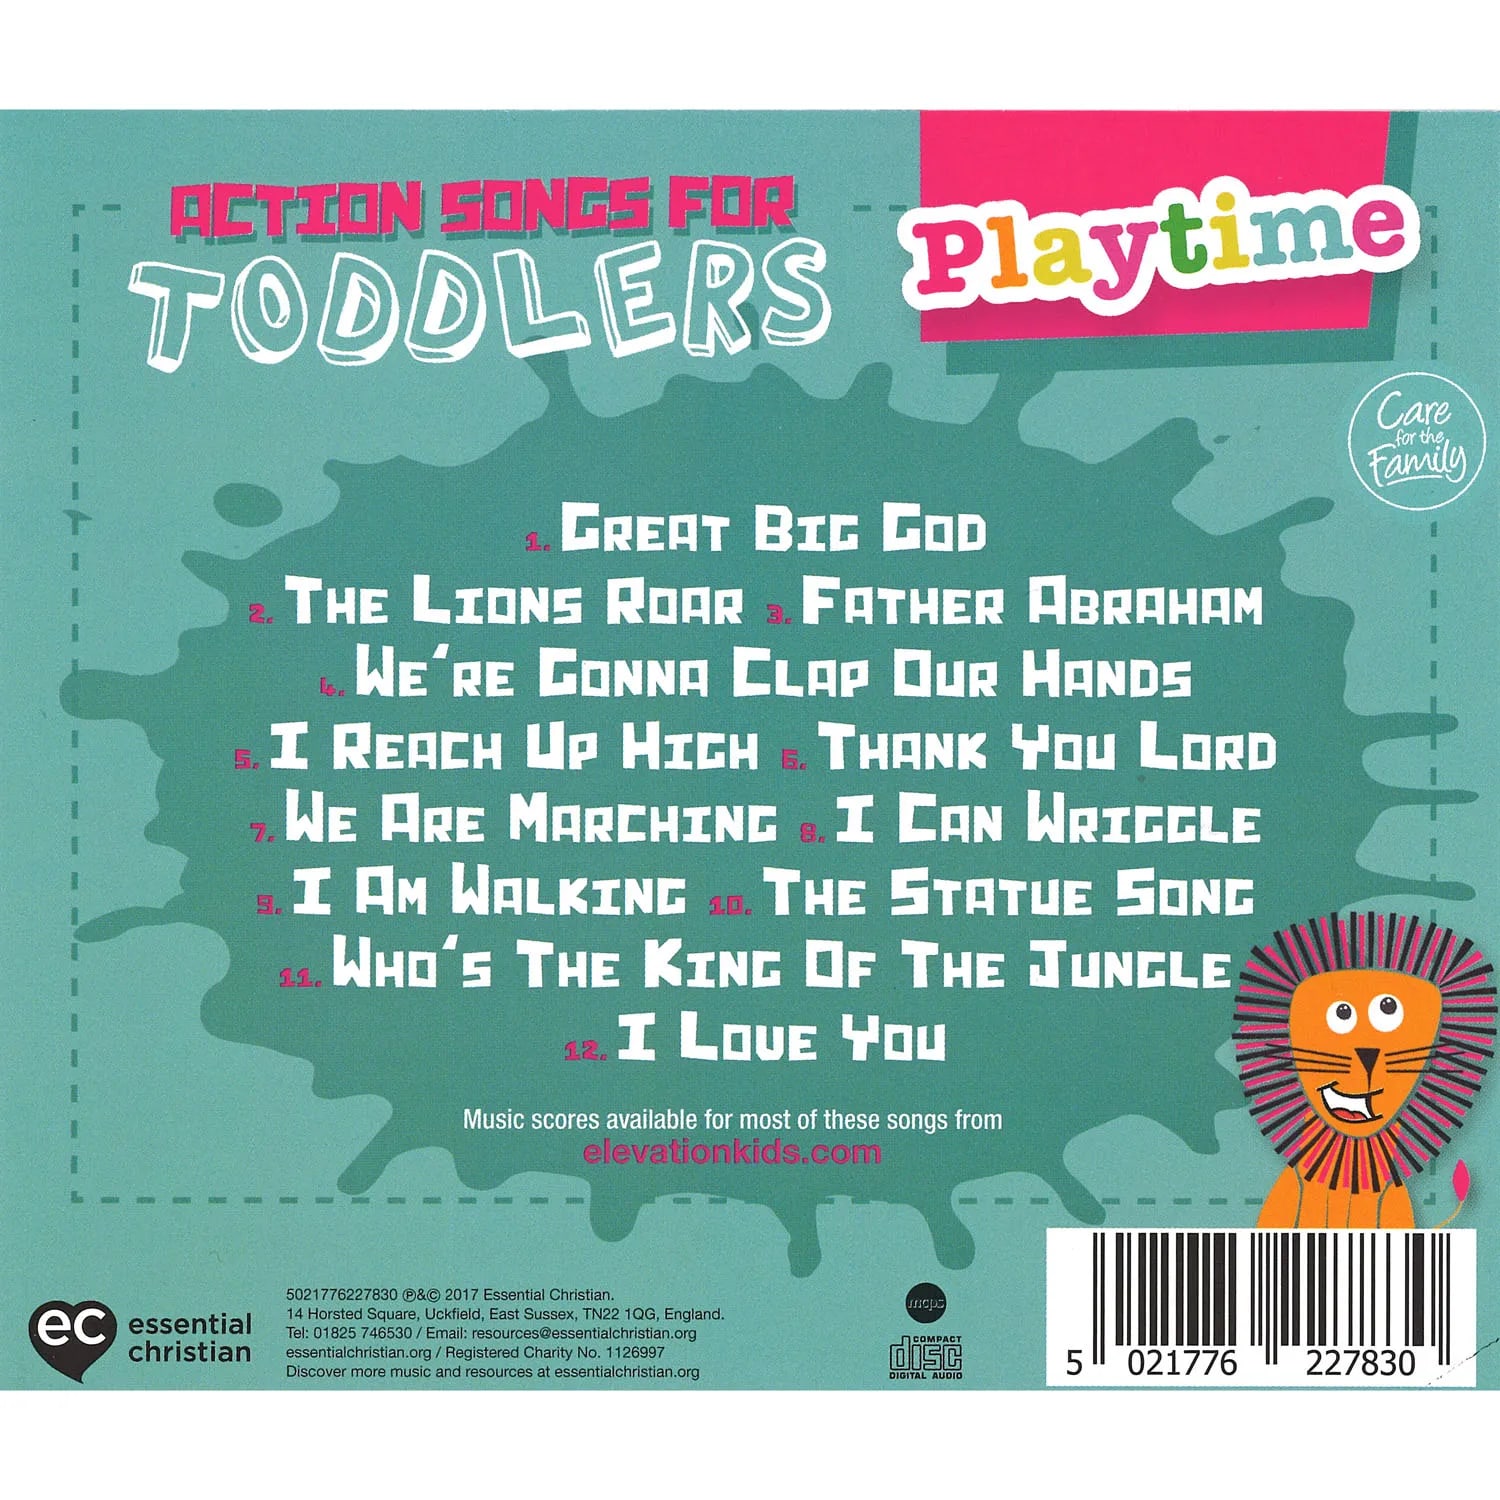 Action Songs for Toddlers